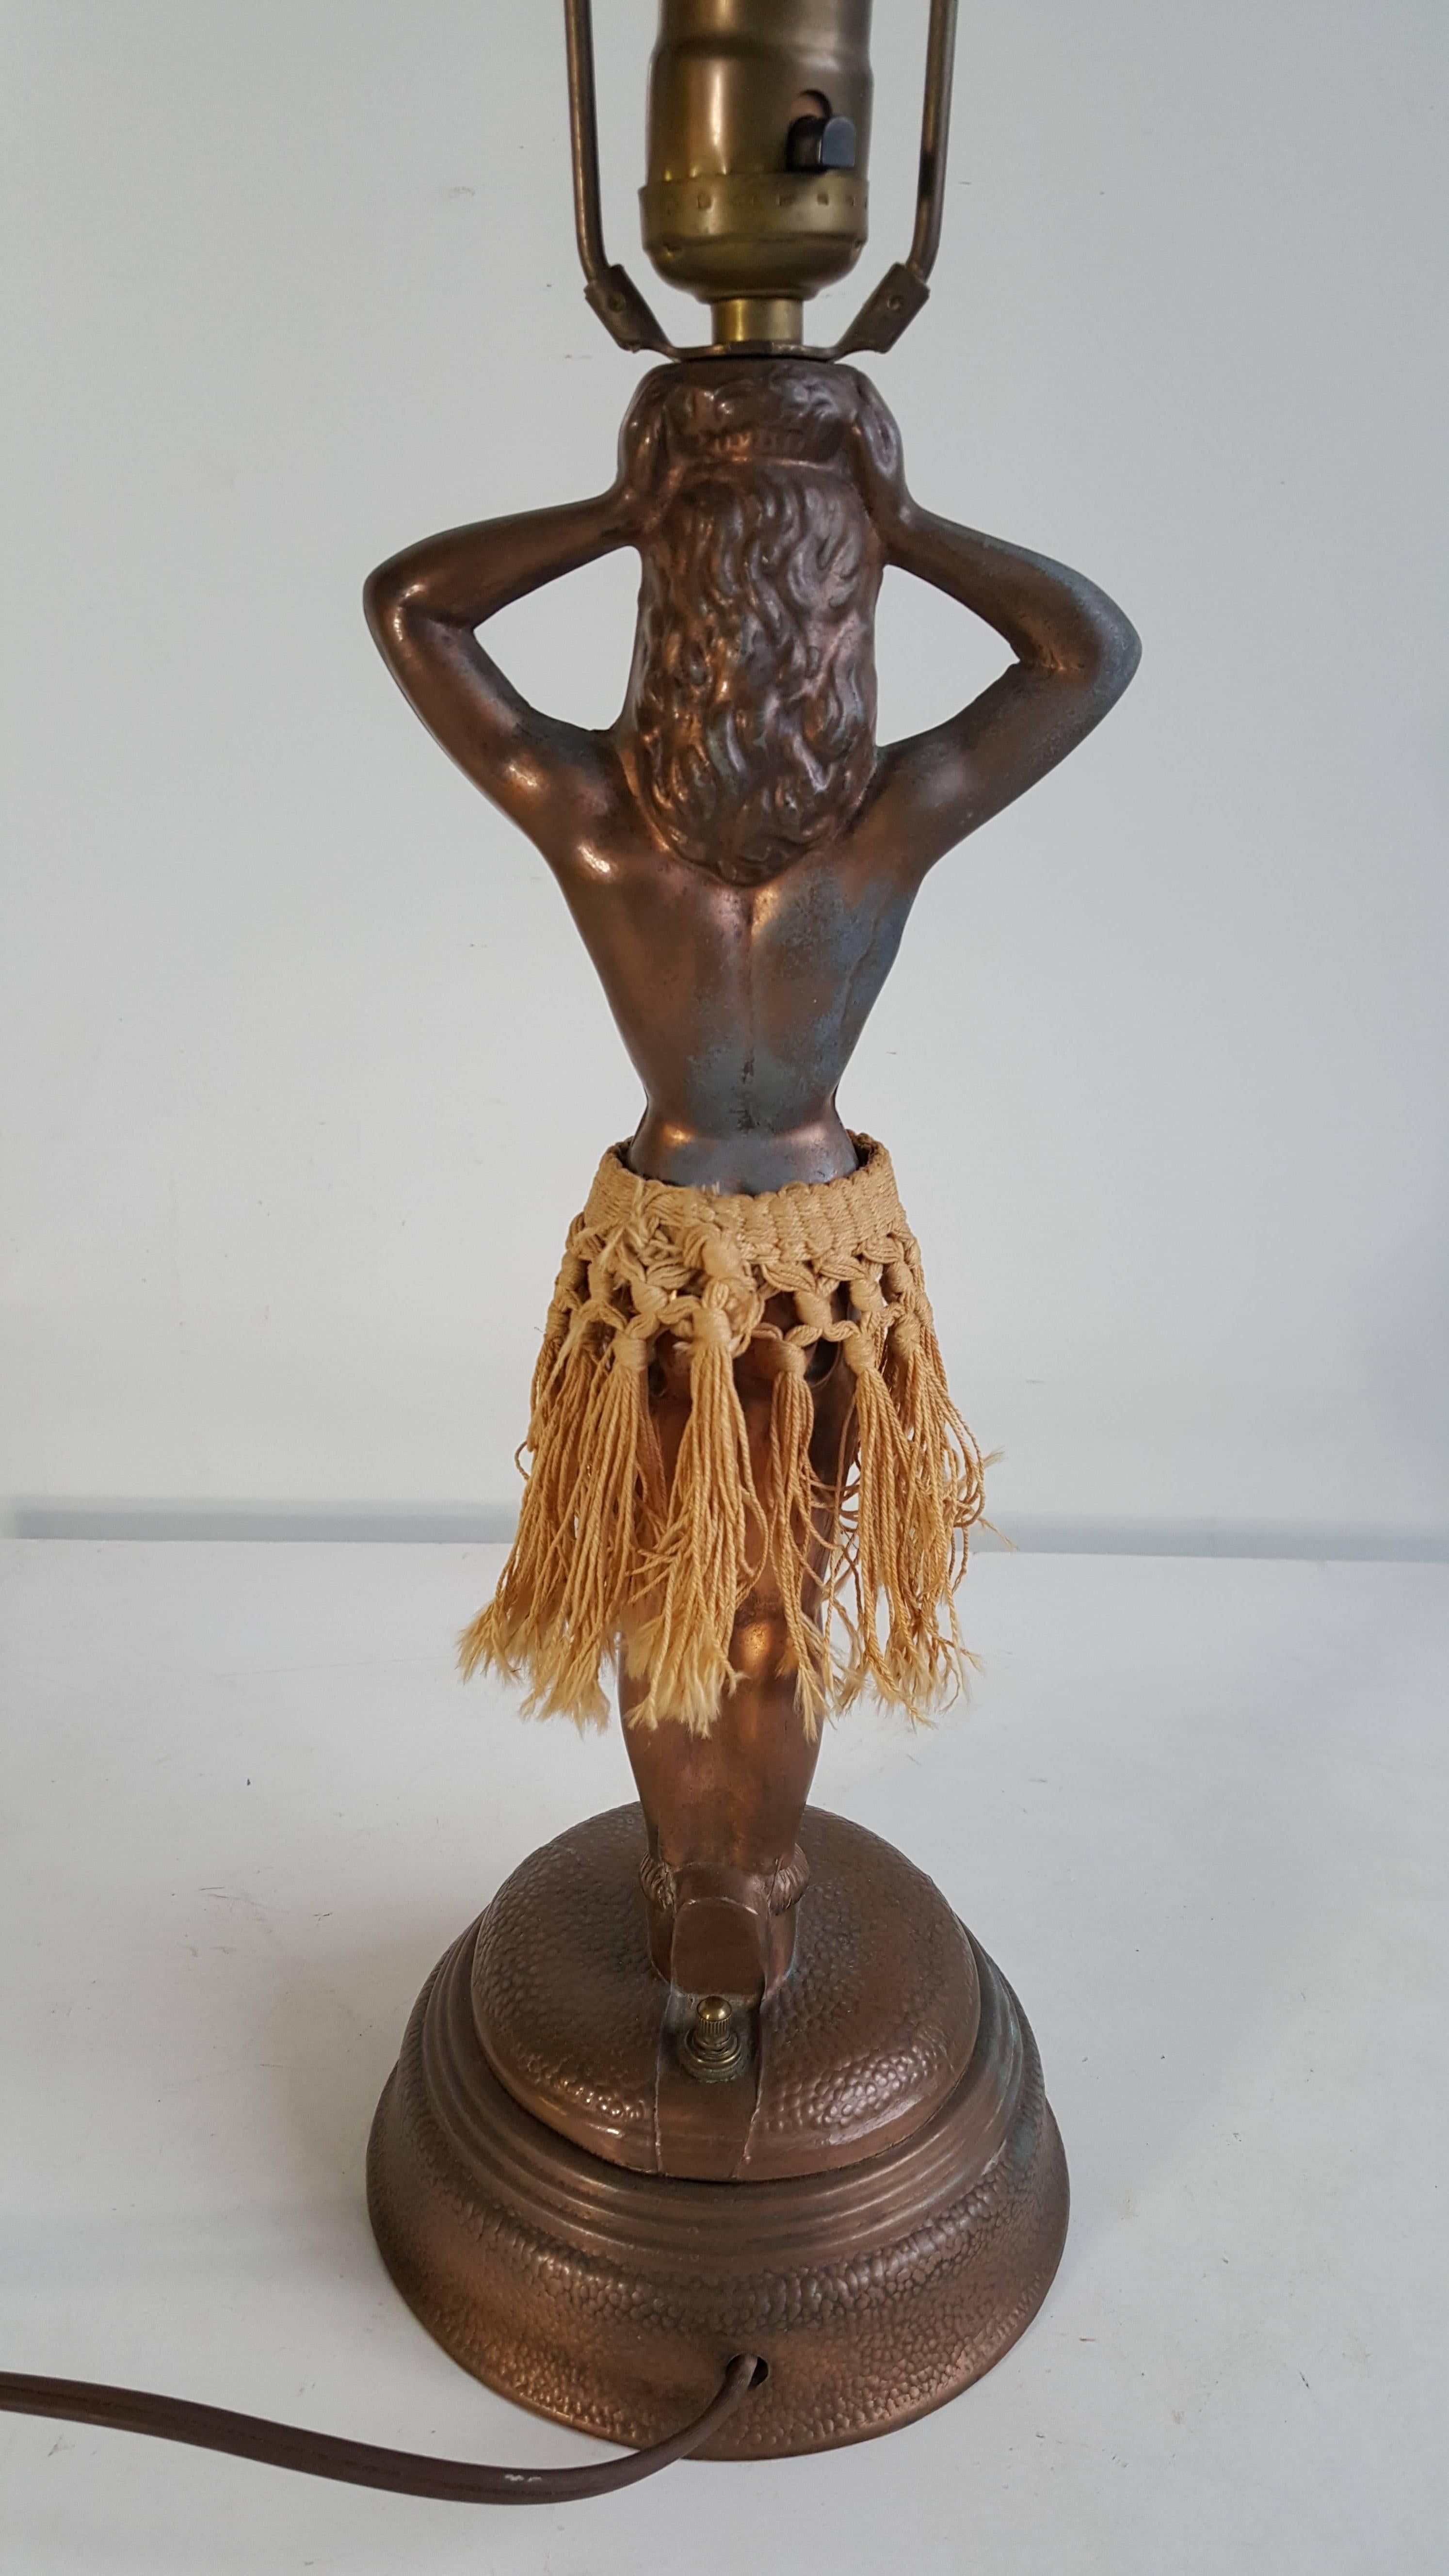 Original hula lamp by Dodge. There are a few different varieties that were made but this one is the nicest looking of them all. The hula girl wiggles and shimmies fine.